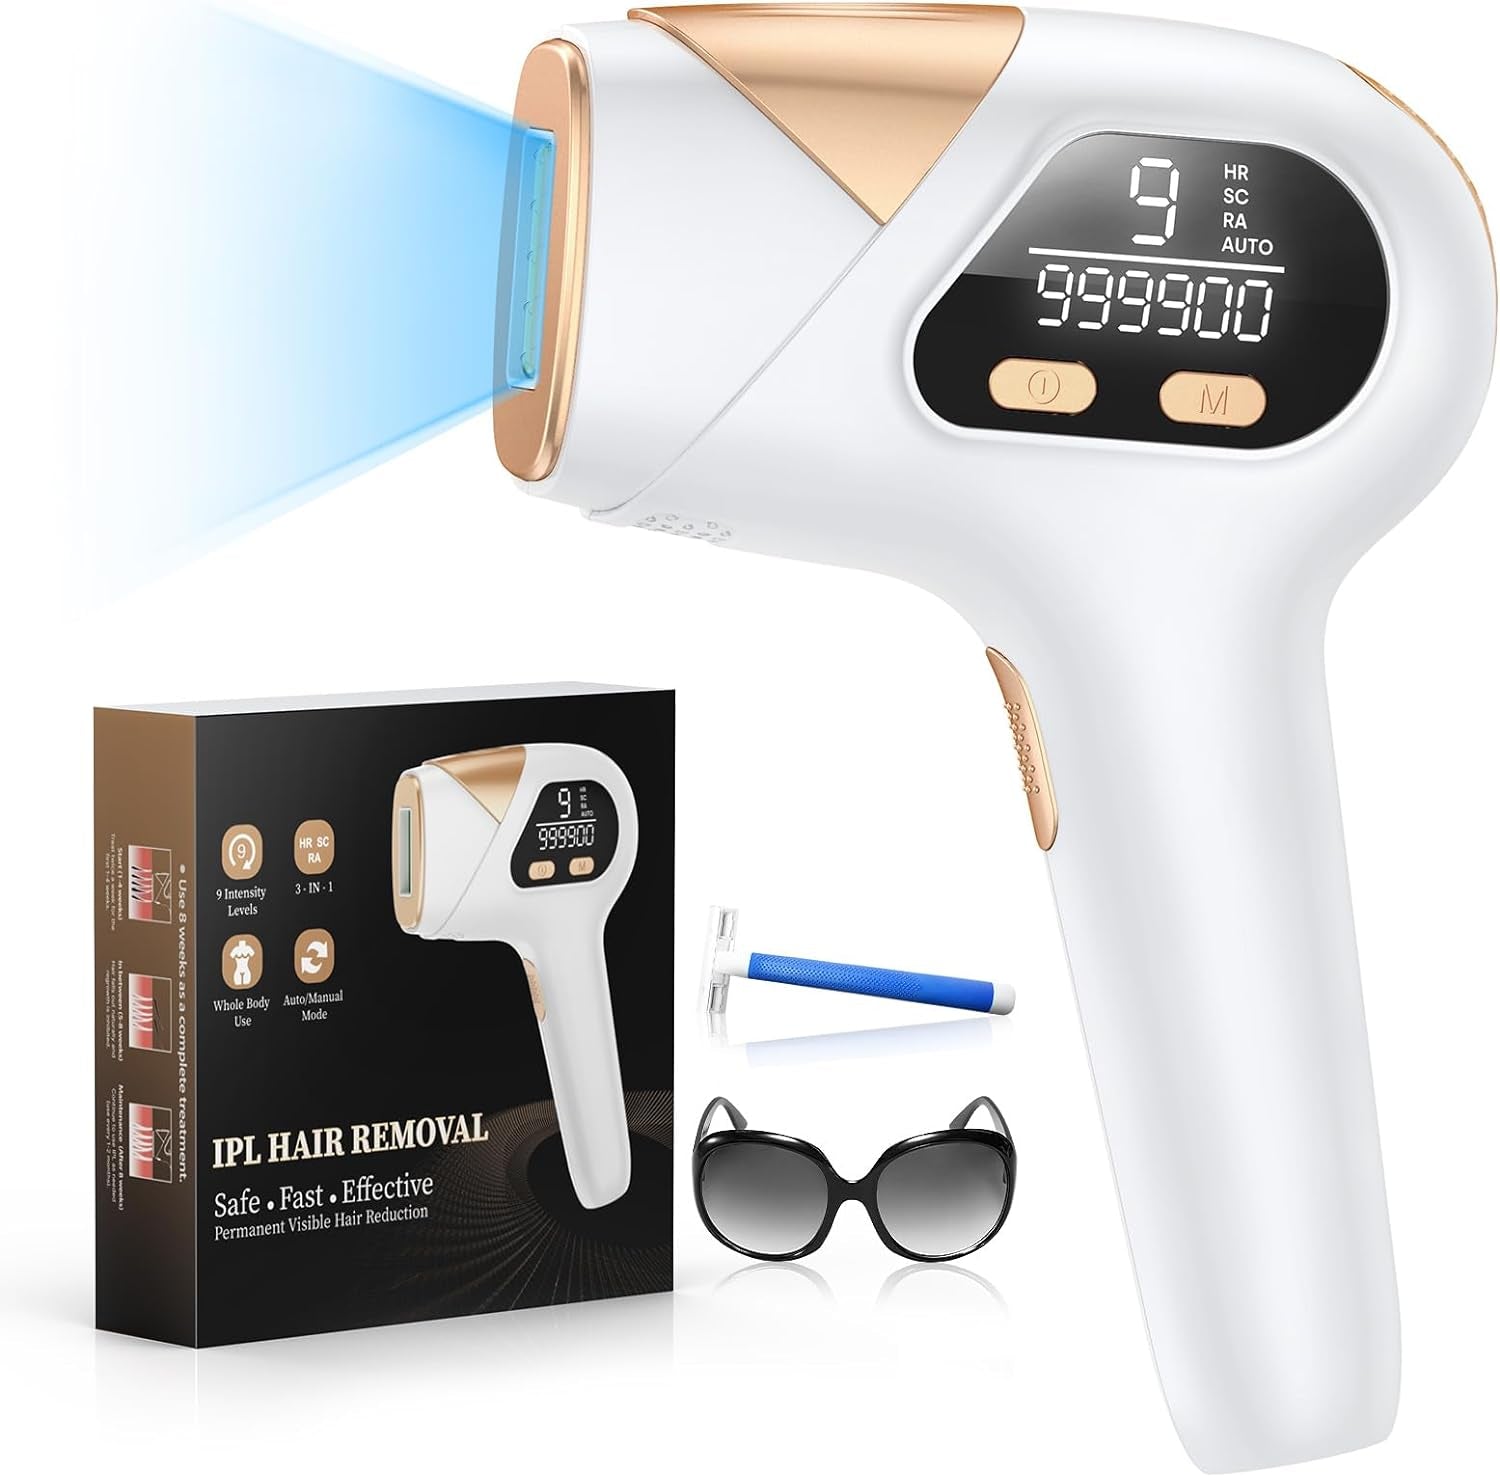 3-in-1 Laser Hair Remover: IPL Hair Removal System